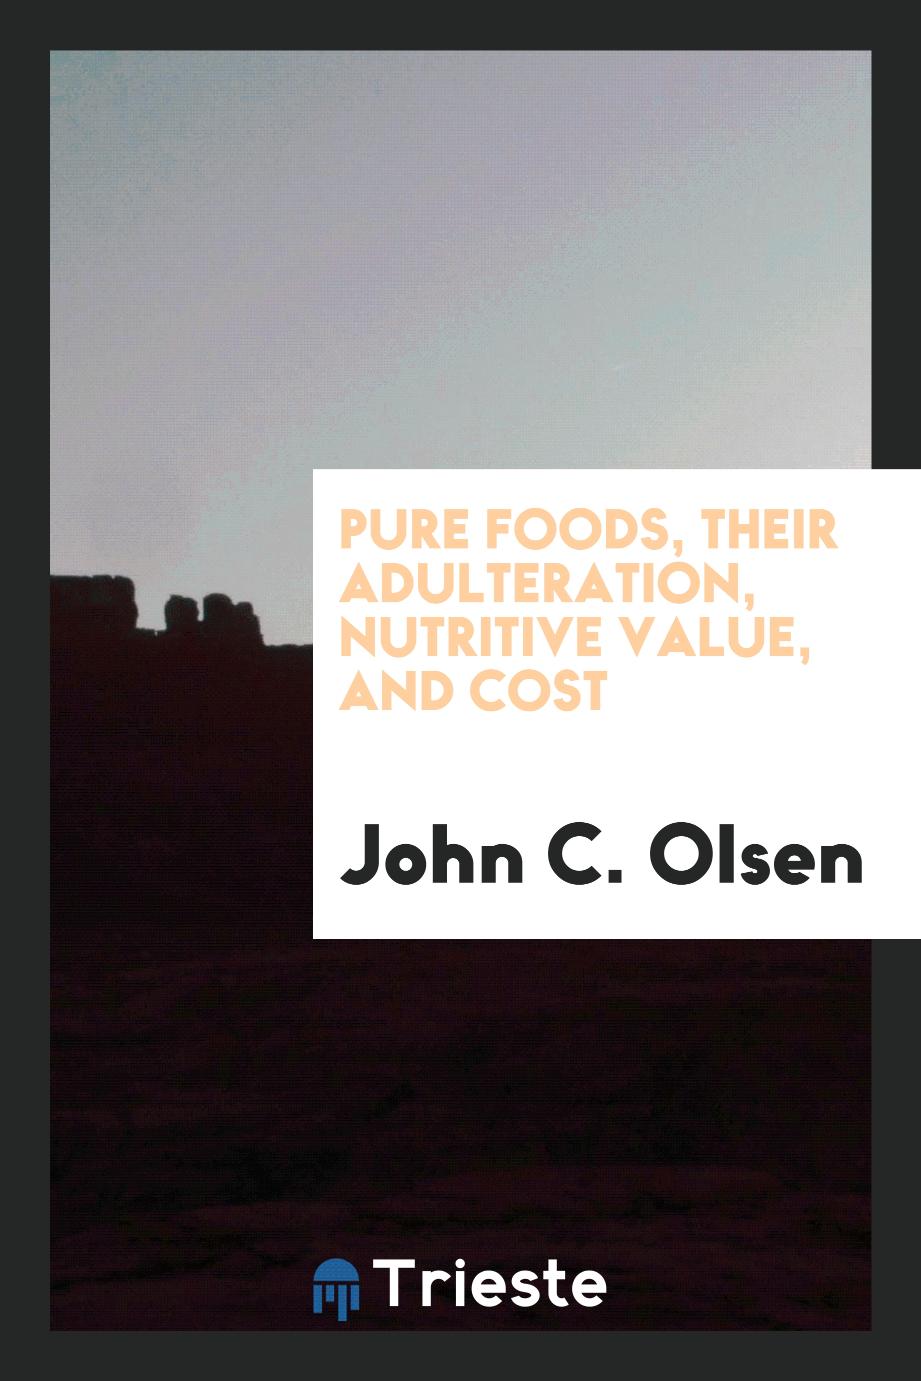 Pure foods, their adulteration, nutritive value, and cost